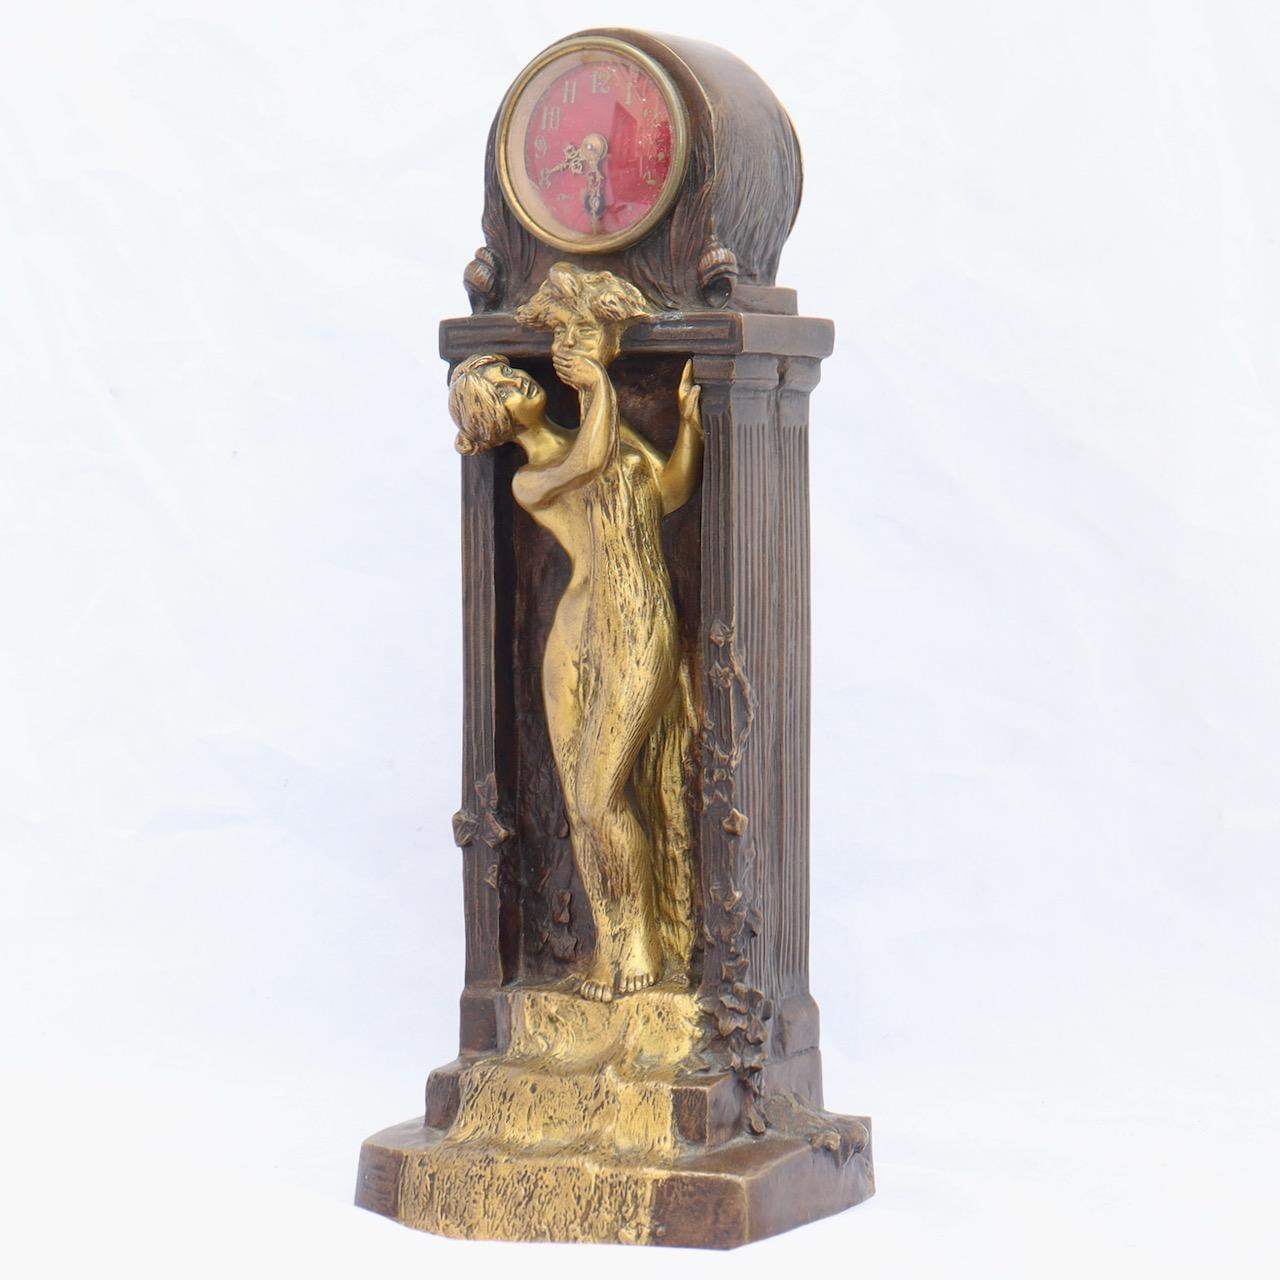 Charles Korschann (1872-1943) 
An Art Nouveau bronze table clock
Gilt and patinated bronze, modelled as a nude female, her hand over the opening of a 
fountainhead, with water rushing down her body, flanked by columns with vines, all beneath a